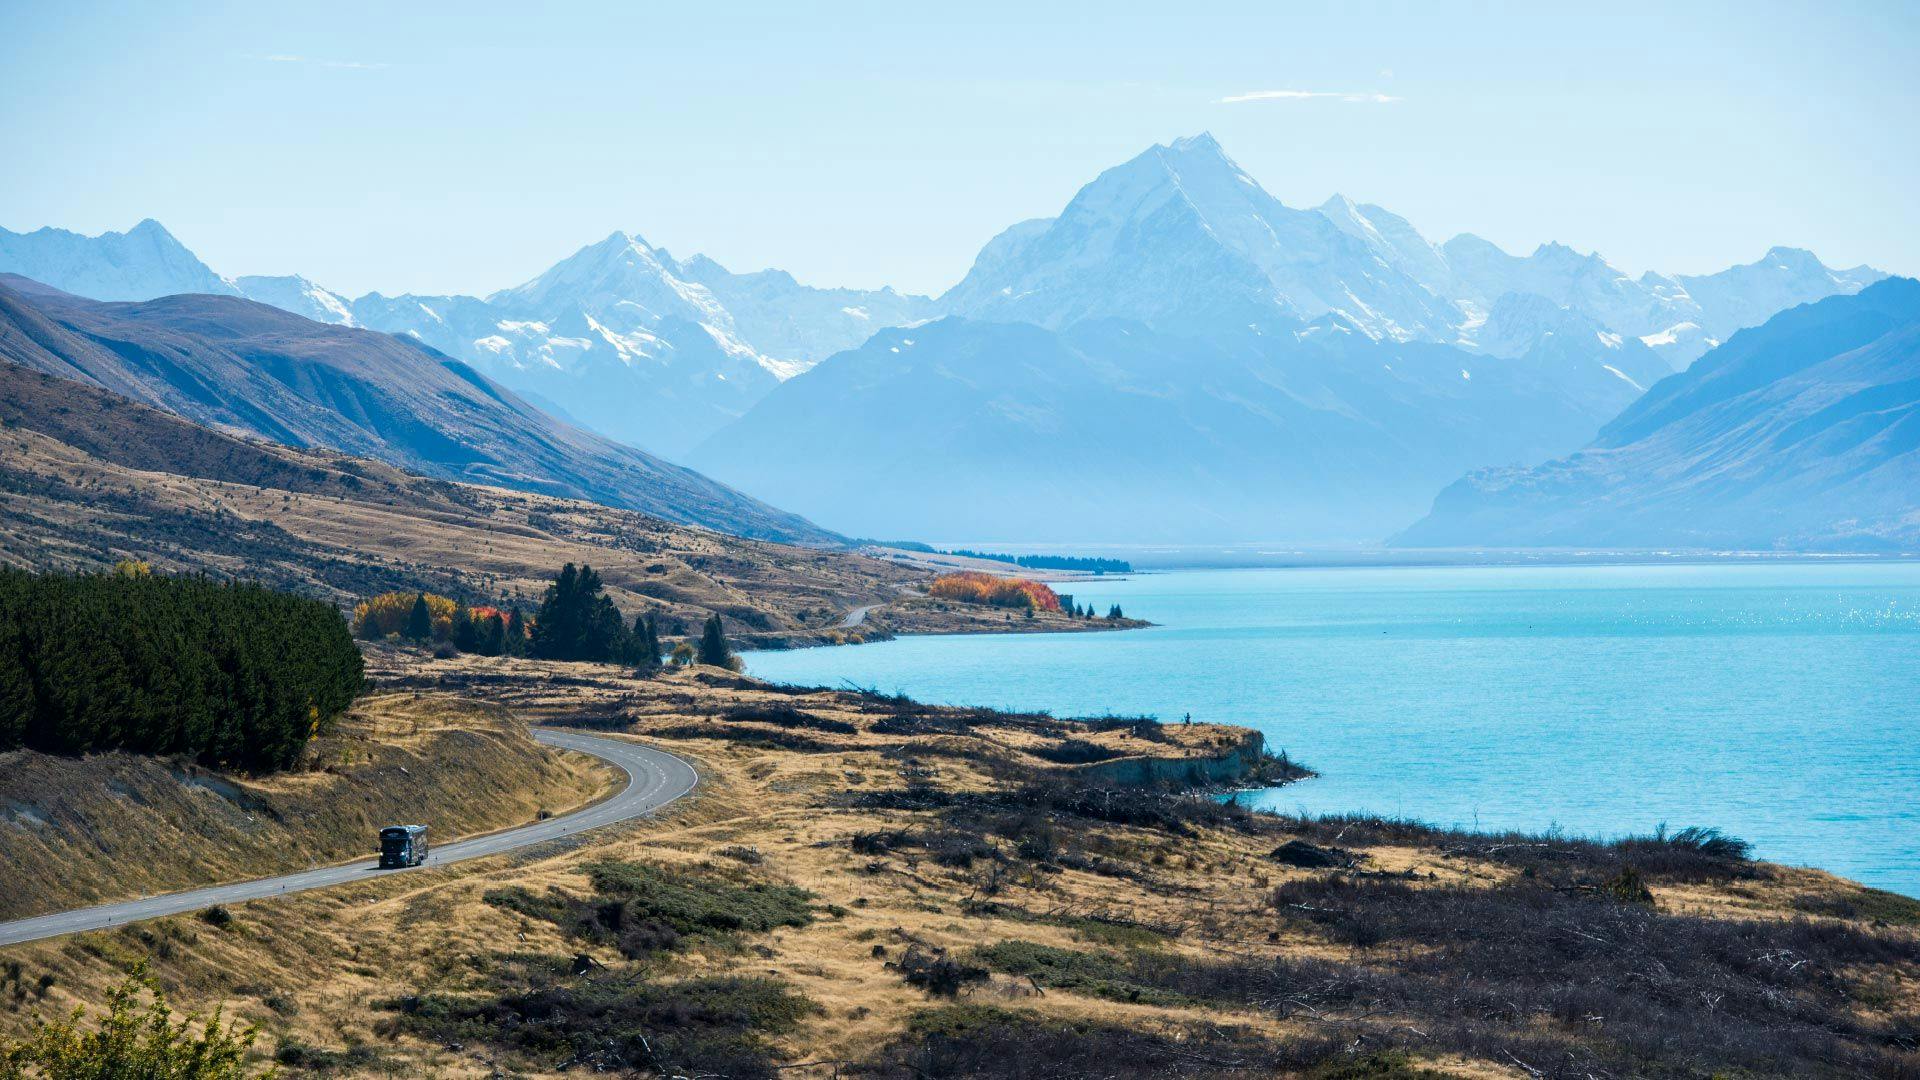 View of Lake Pukaki and the Southern Alps